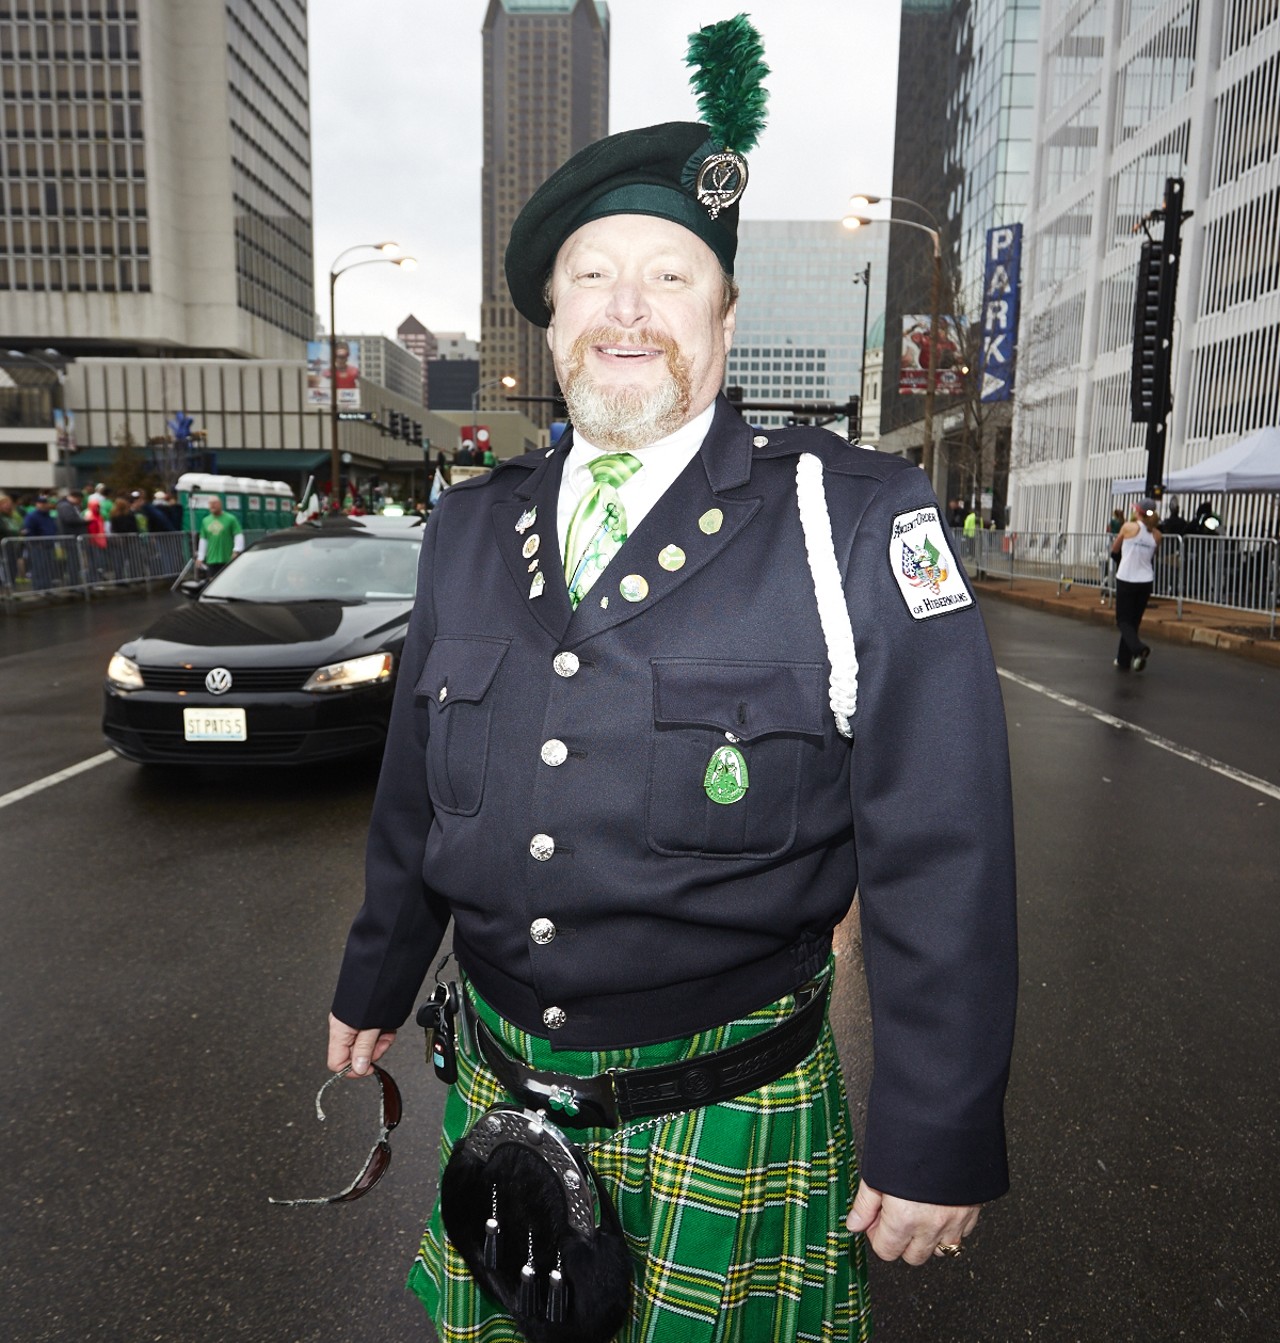 Mike Quinn with the Ancient Order of Hibernians oversees the beginning of the race at the 37th Annual St. Patrick's Day Parade Run in downtown St. Louis on March 14, 2015.